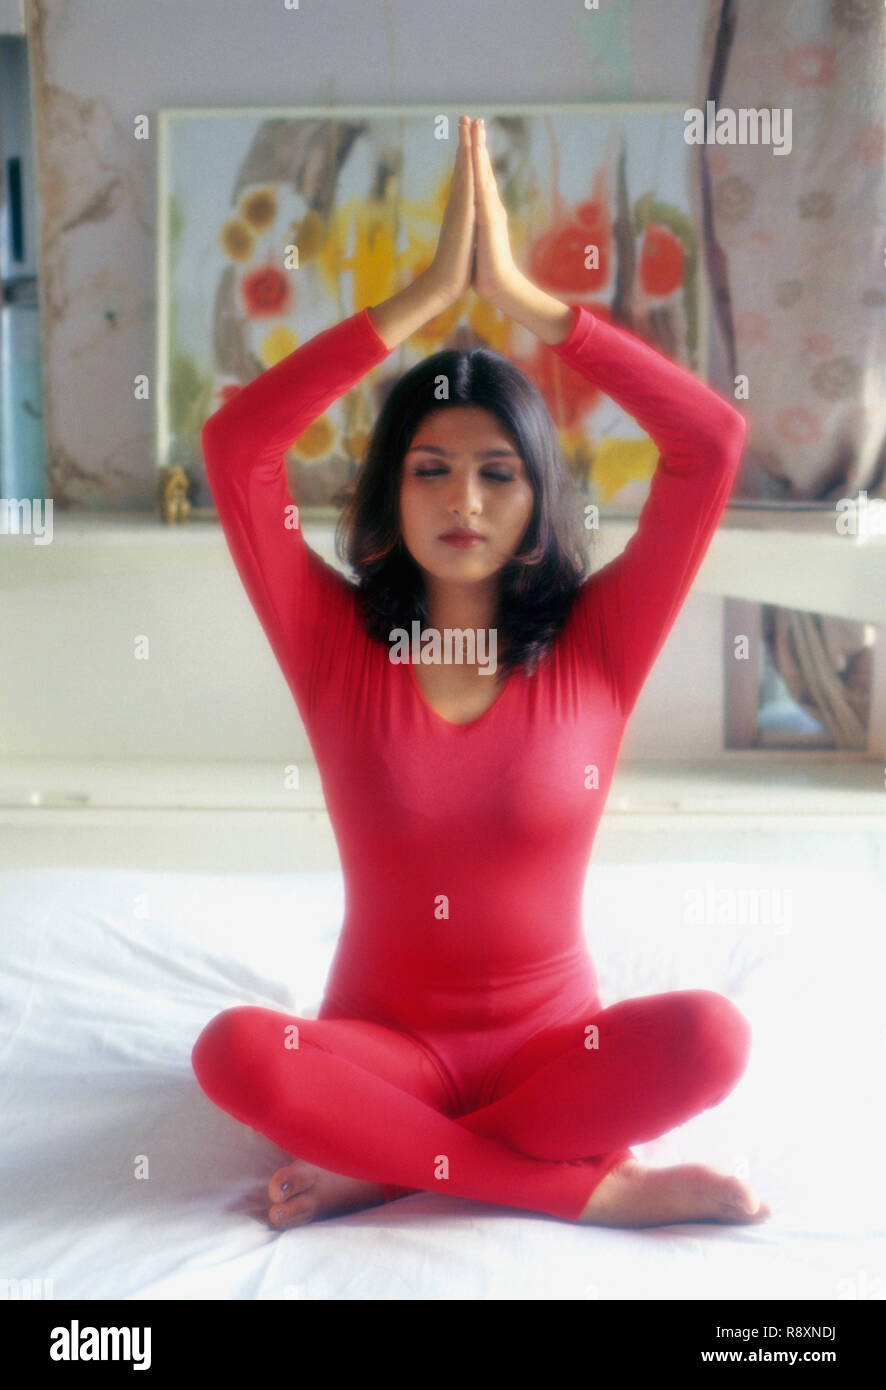 Women doing yoga in red leotards MR#364 Stock Photo